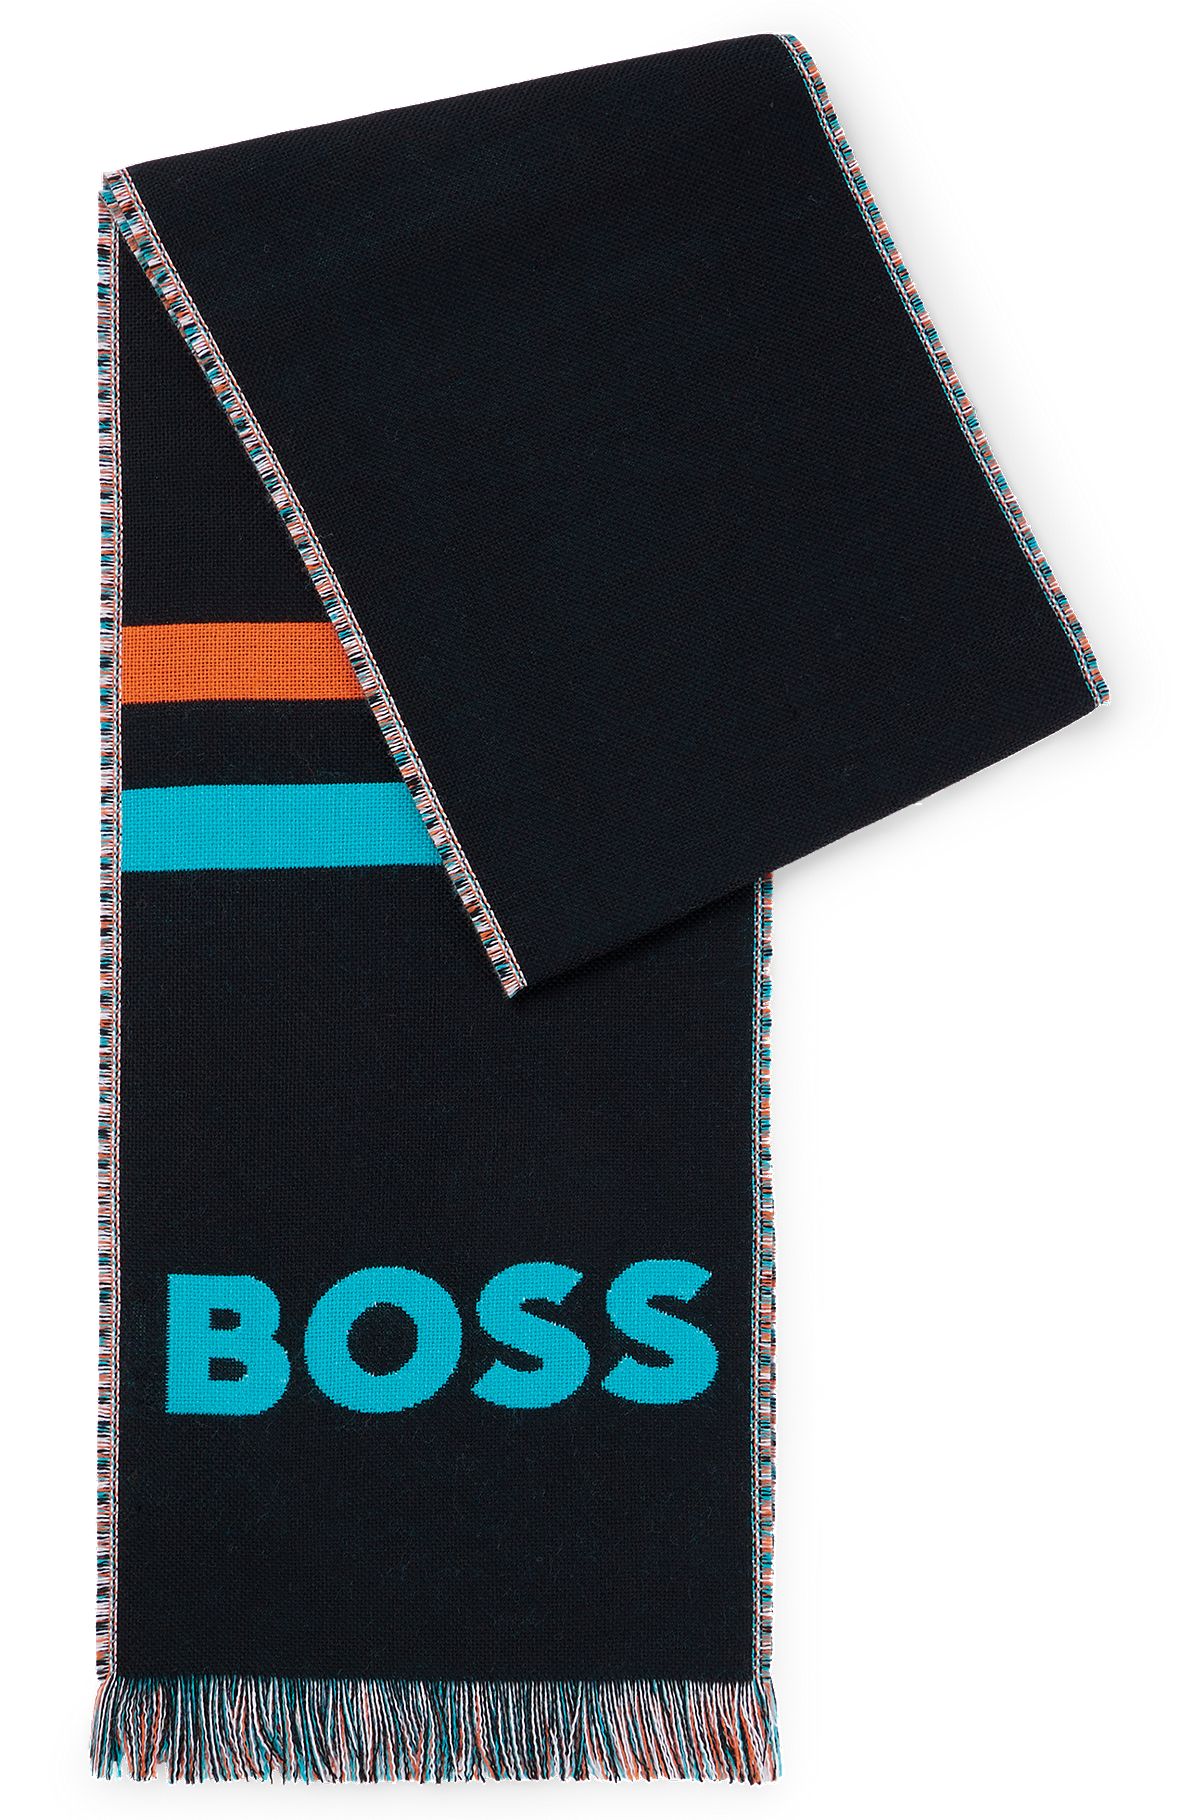 BOSS x NFL logo scarf with Miami Dolphins branding, Dolphins